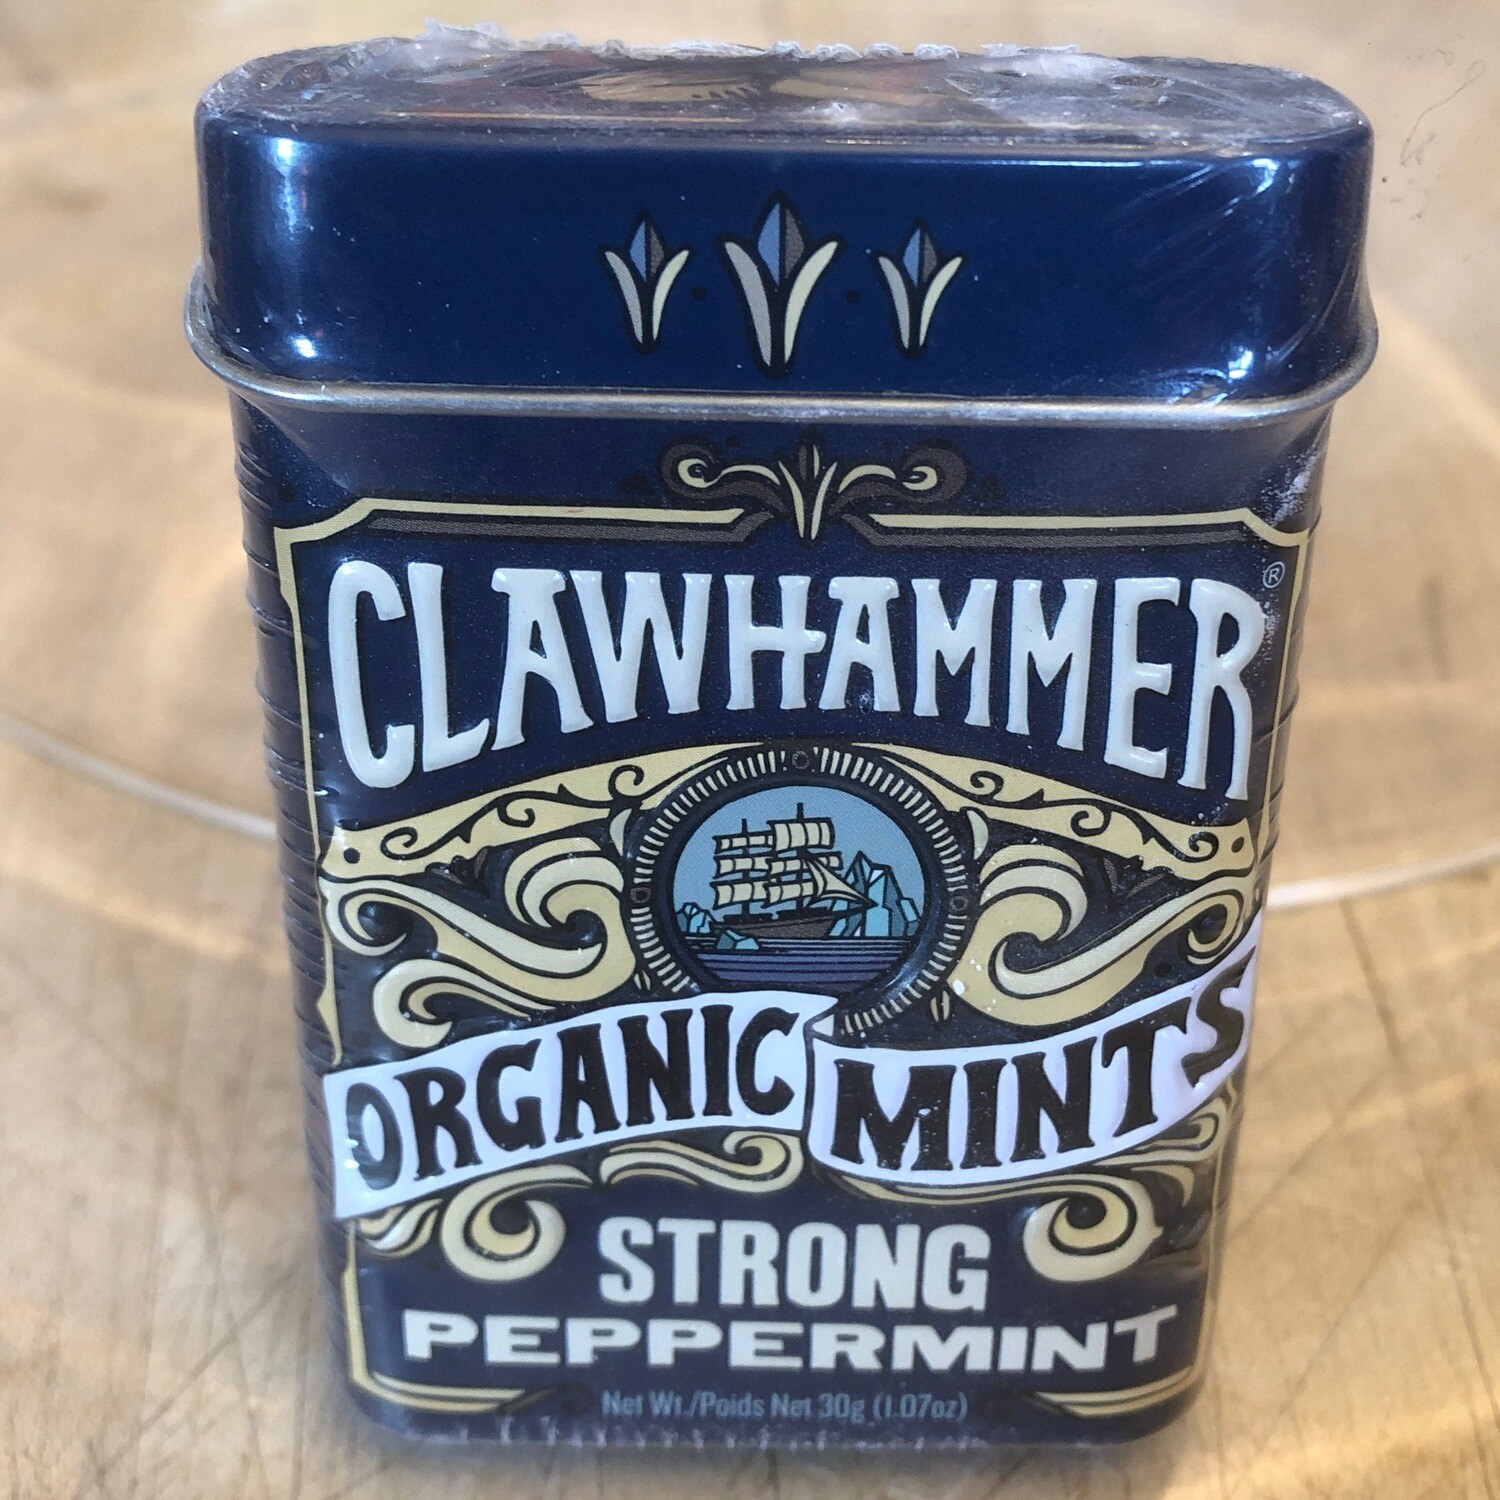 Claw hammer Peppermint